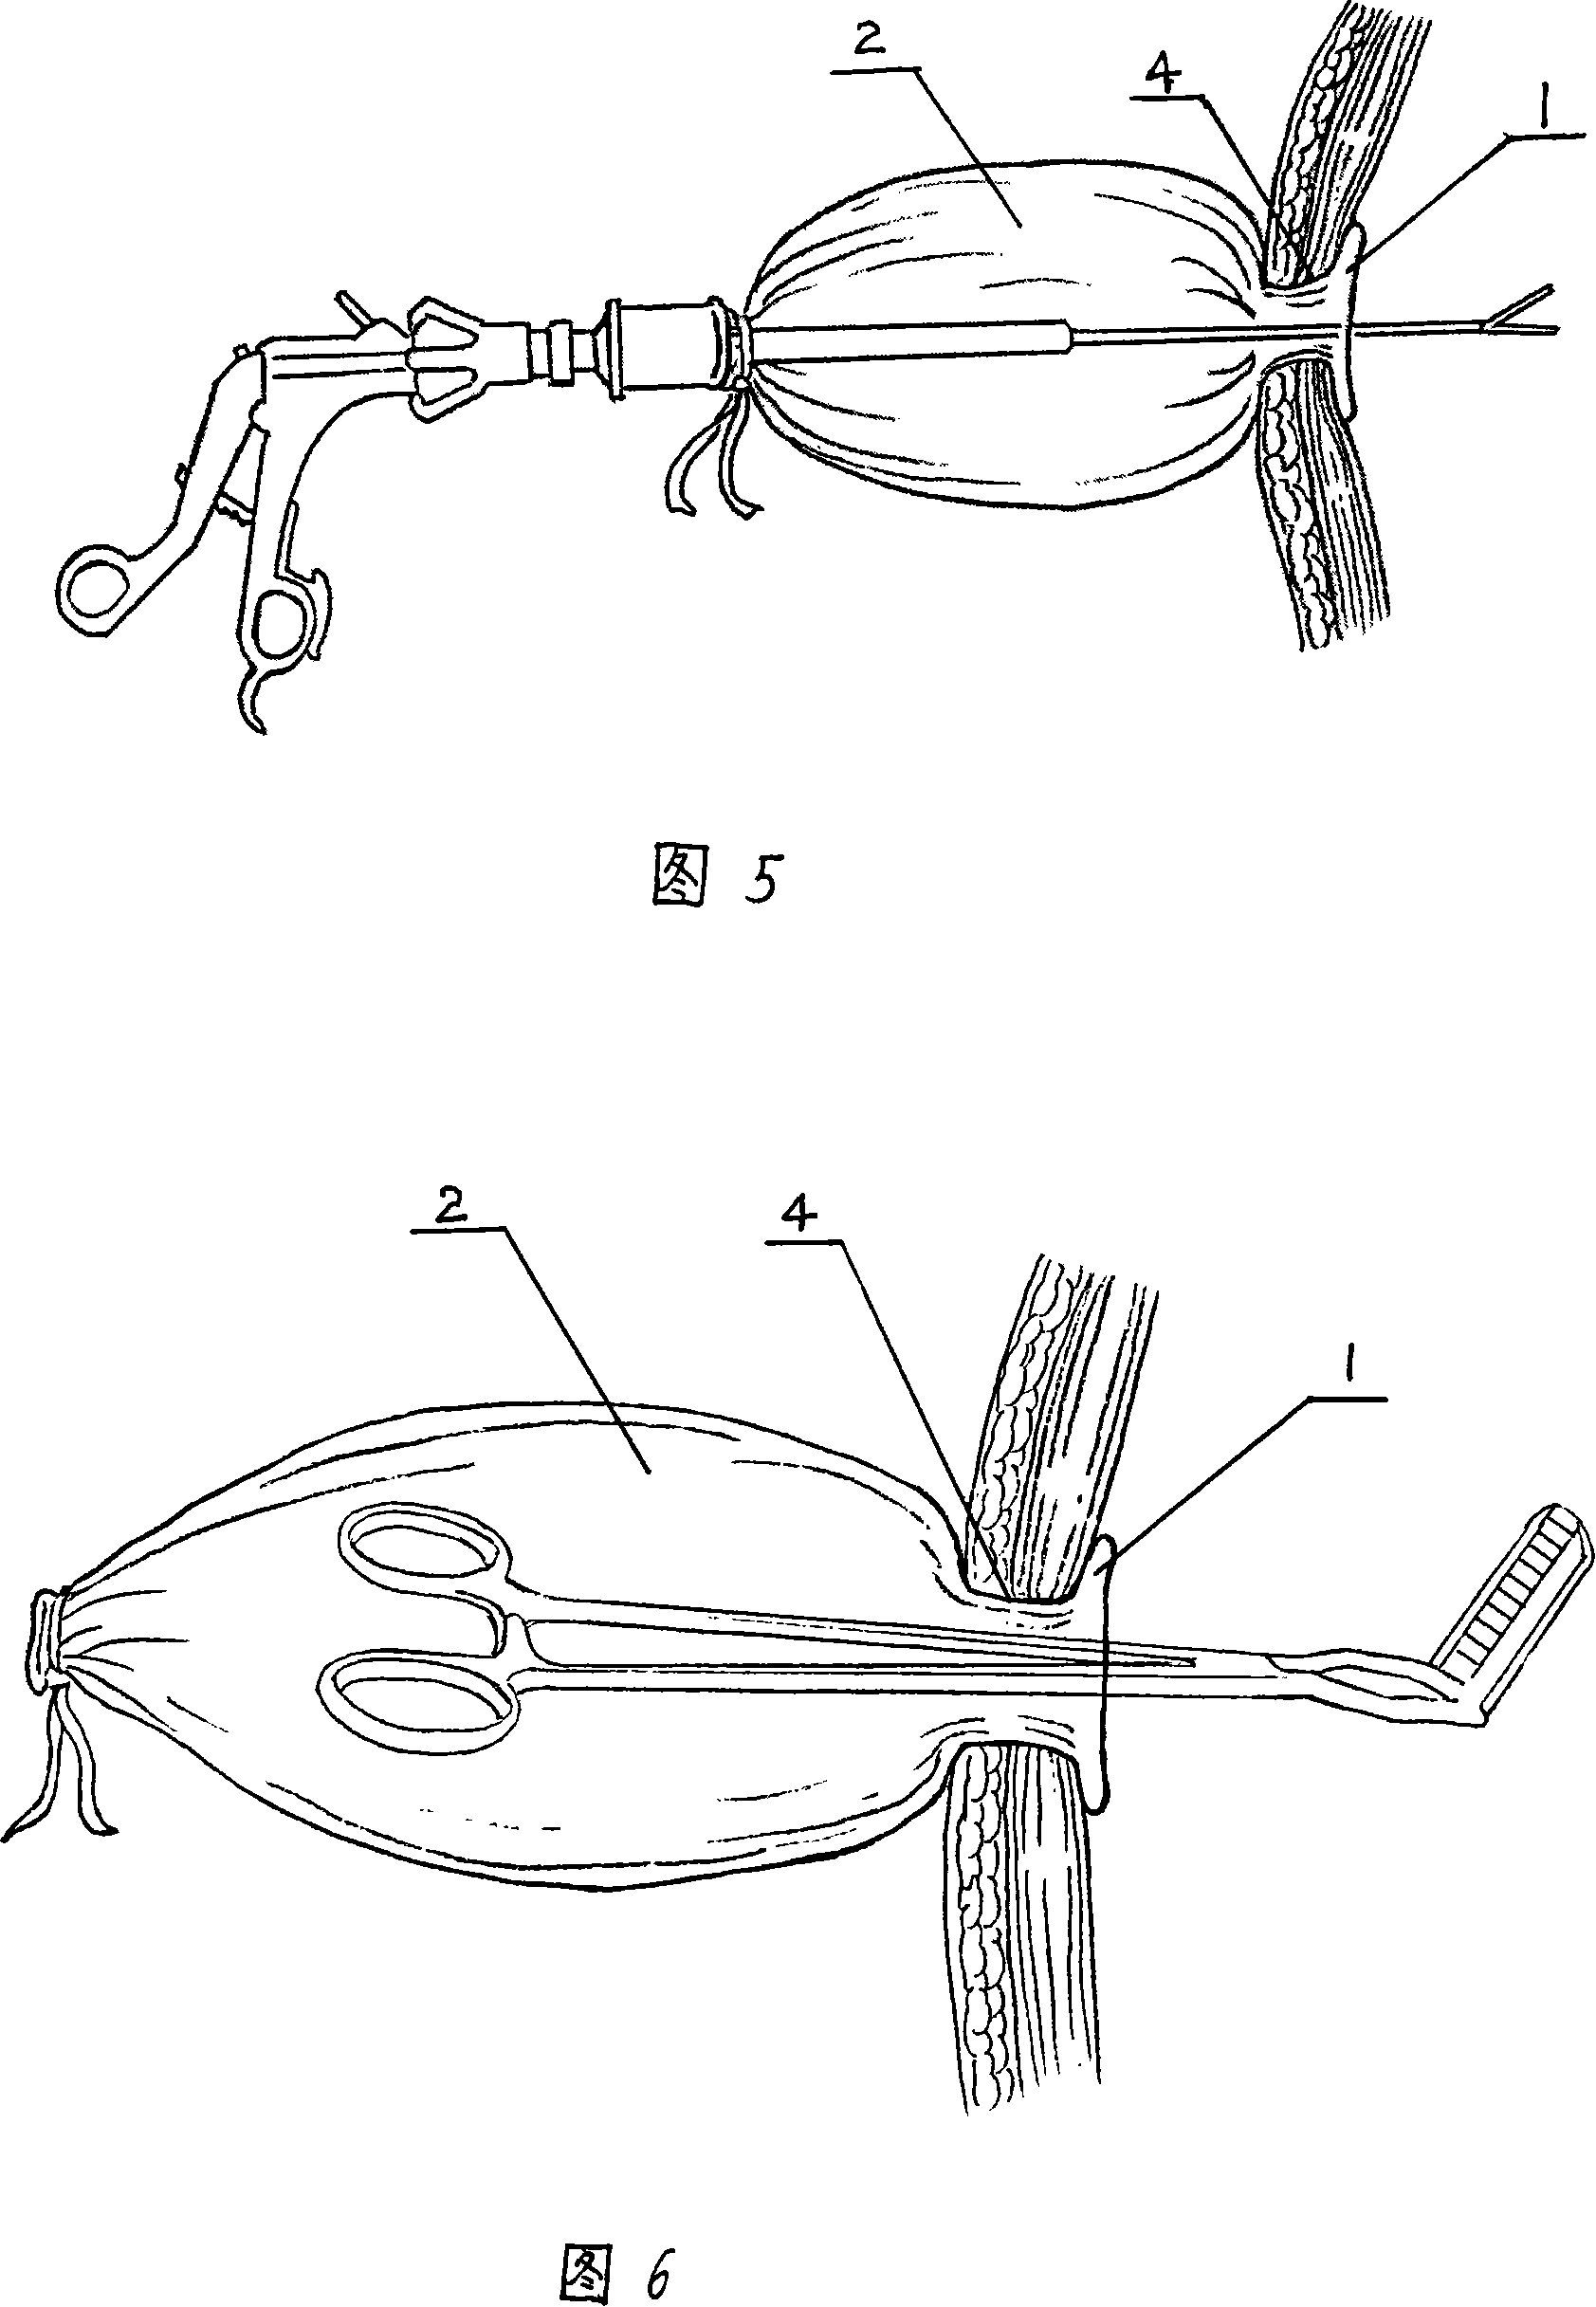 Device for sealing abdominal wall lancing for peritoneoscope operation